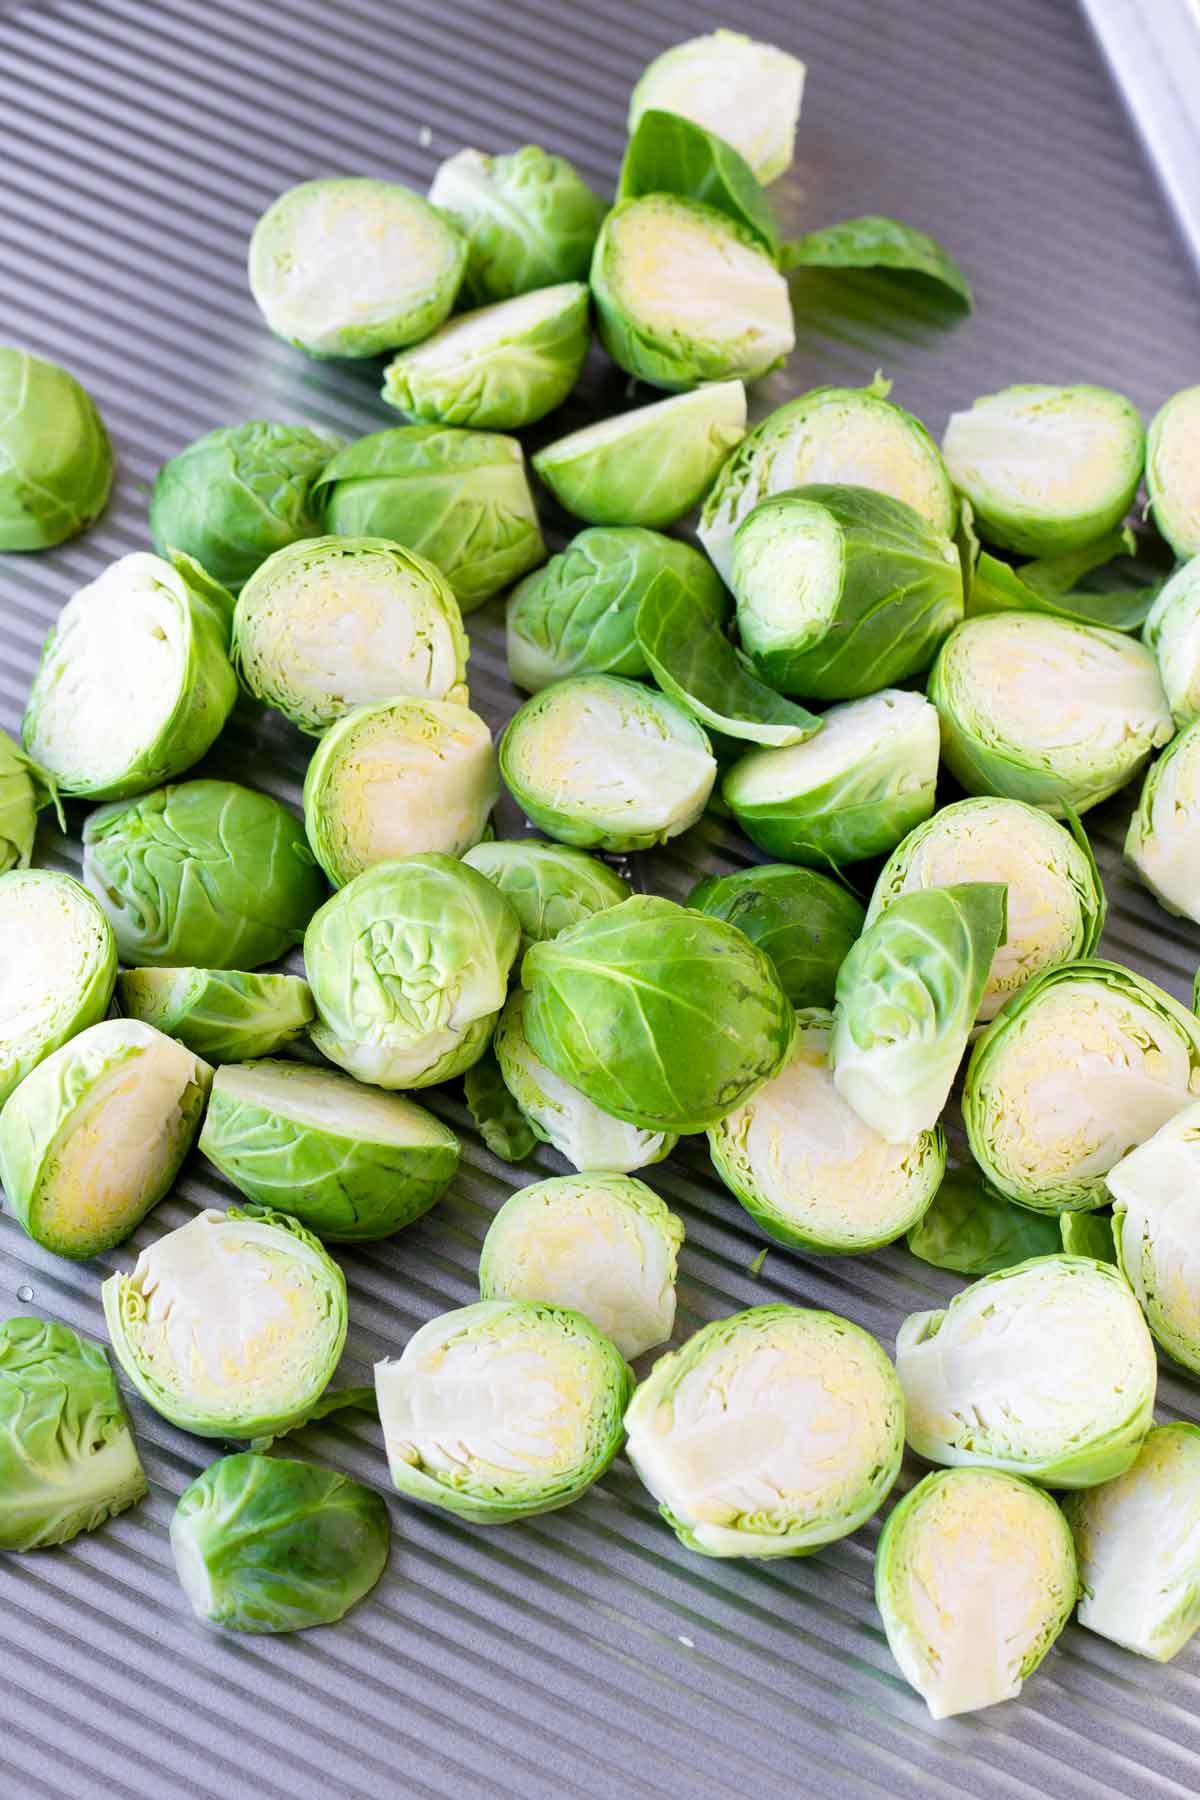 sliced raw brussels sprouts on sheet pan